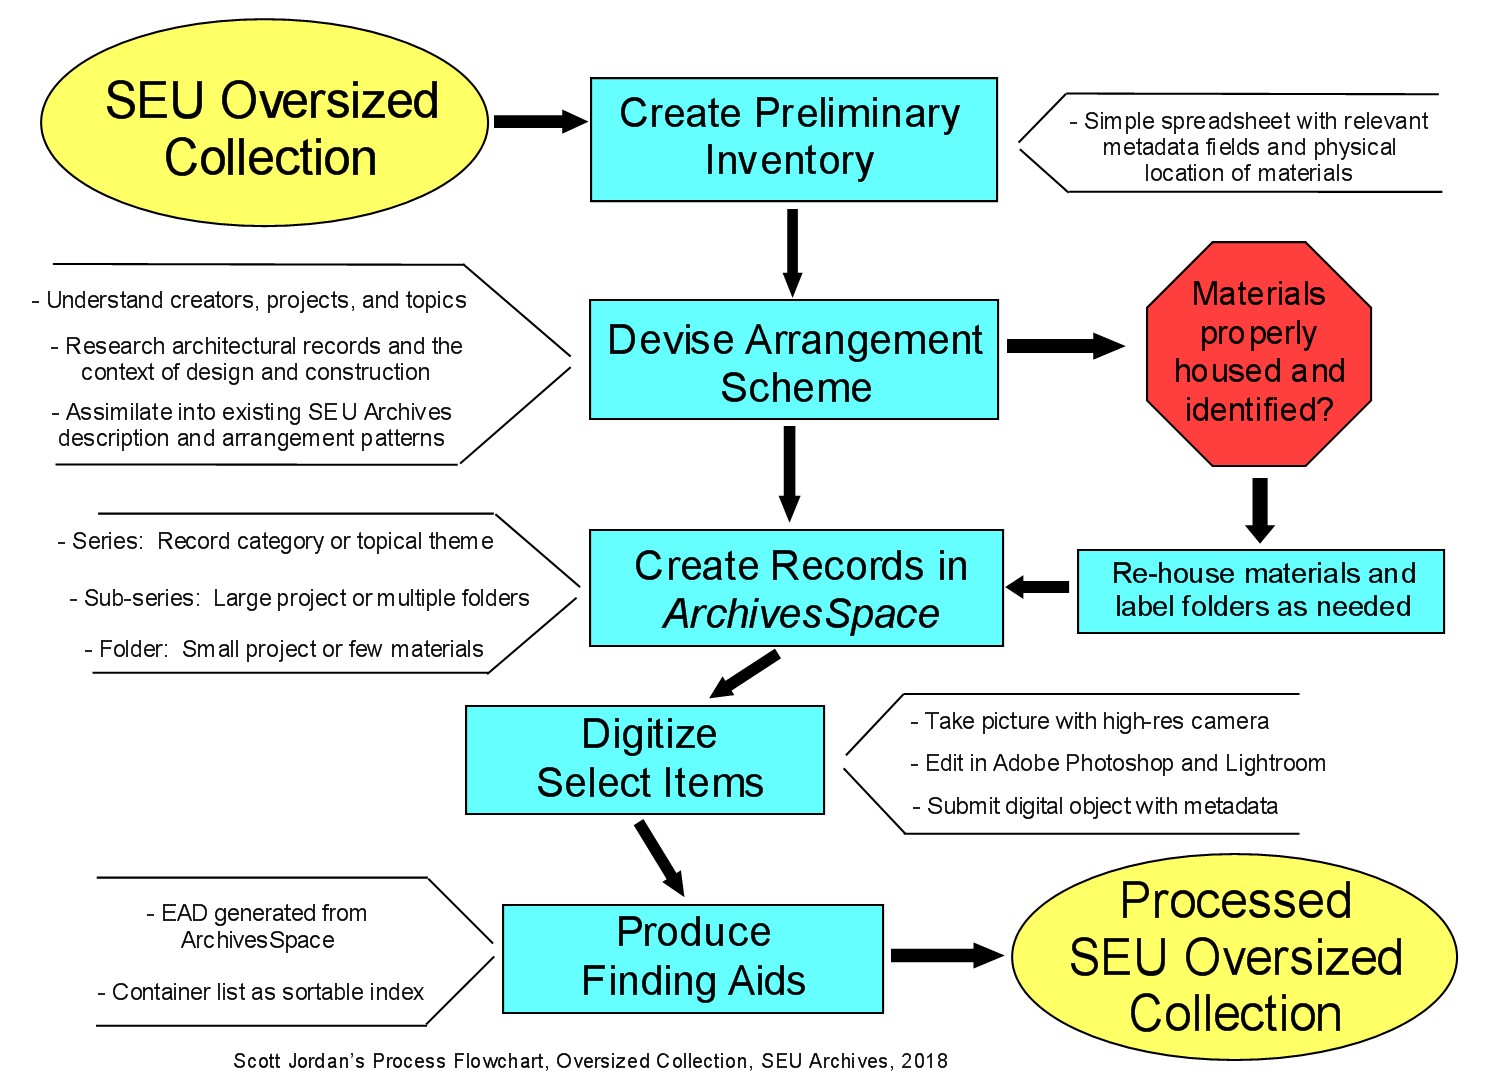 Diagram of Oversized Collection Processing Flowchart